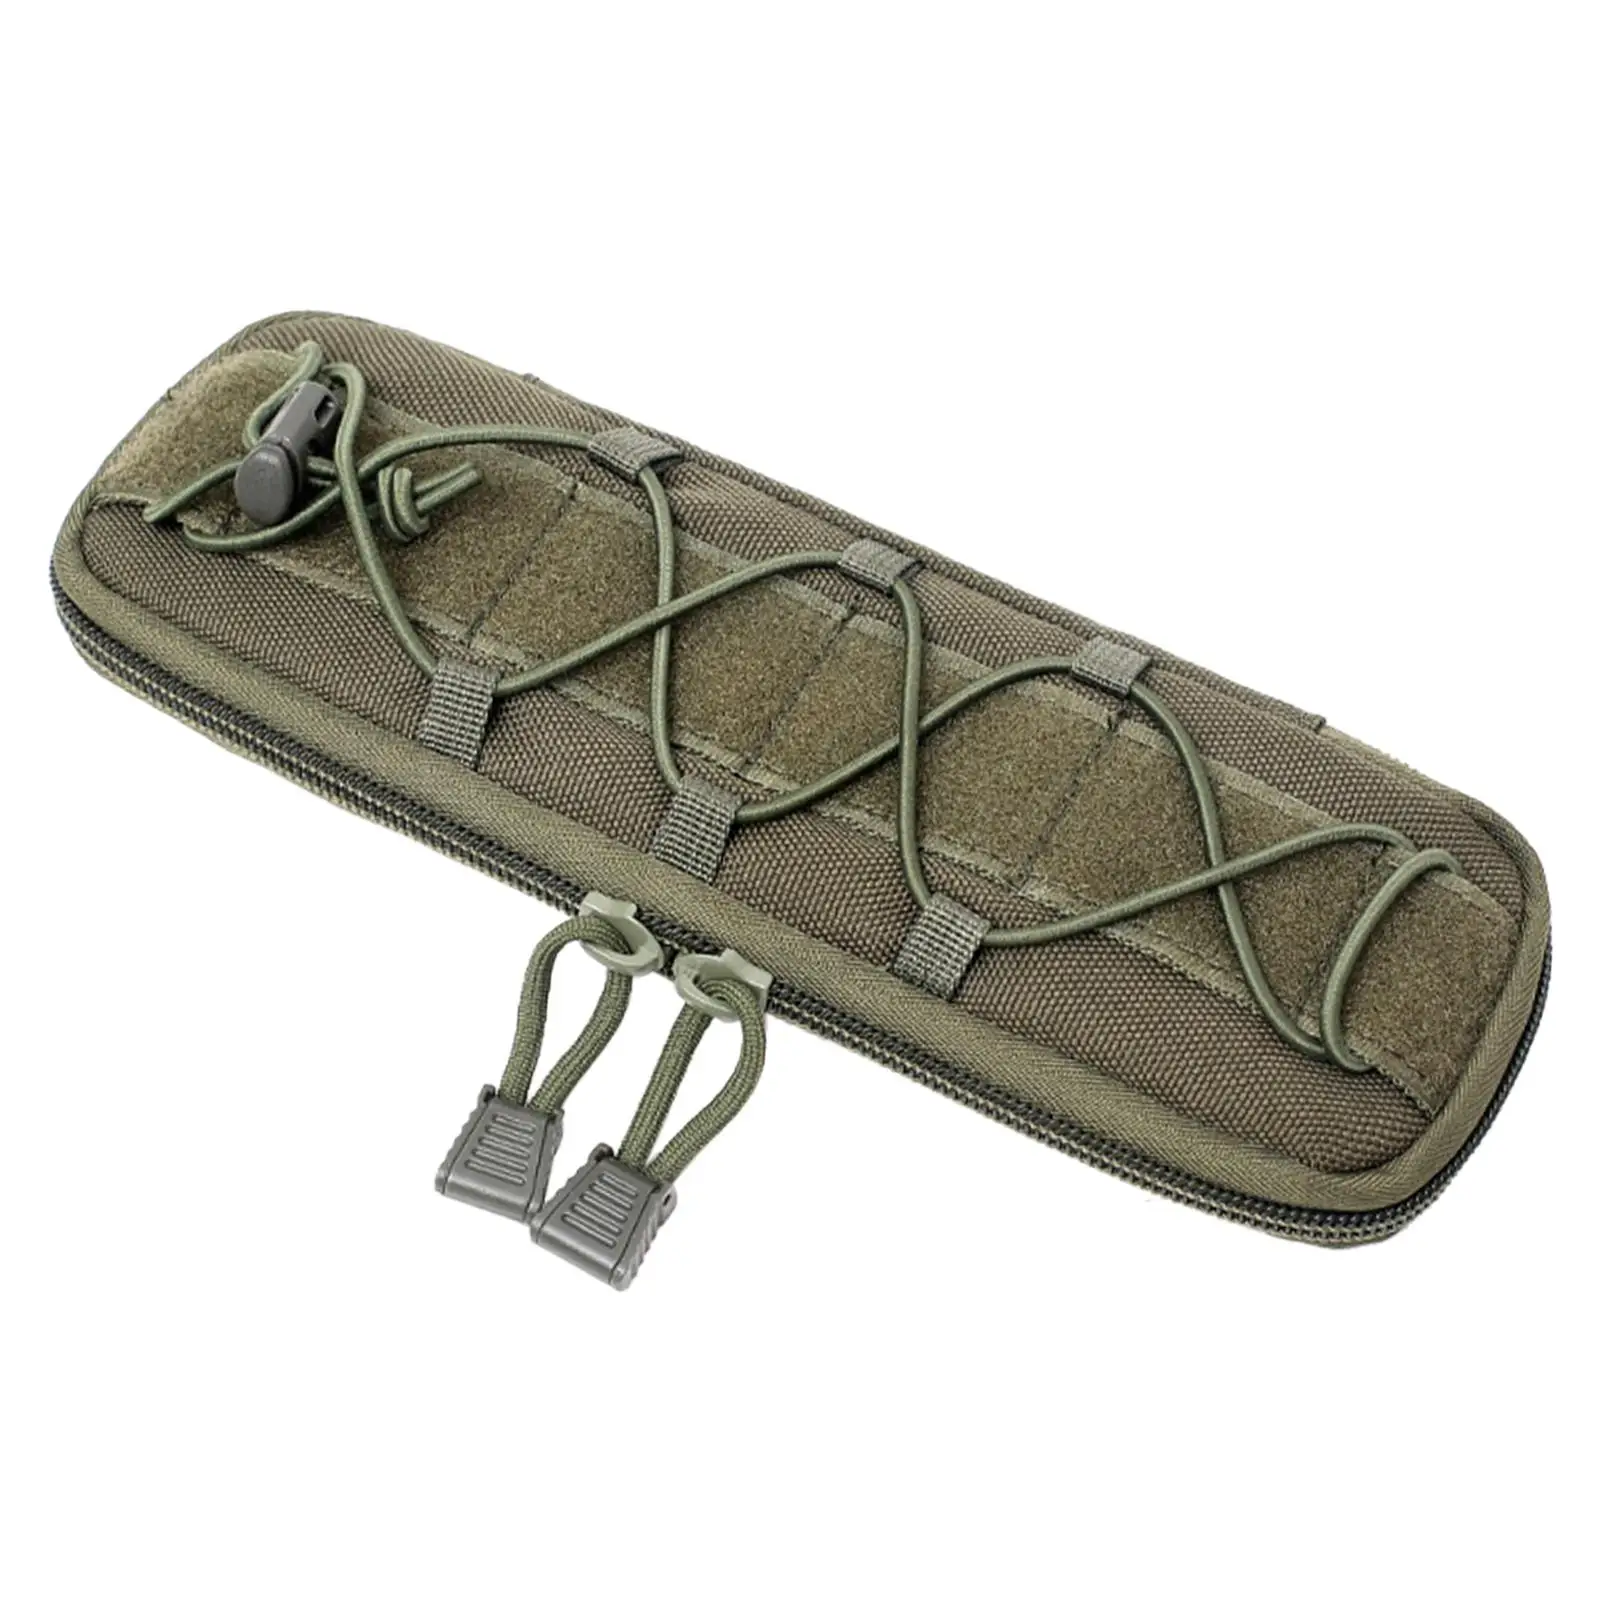  Pouch Holder Multiuse Tool Storage Organizer Hunting Camping Case  Bag for Survival Tool Kit , ,Hammer ,Training, Hiking